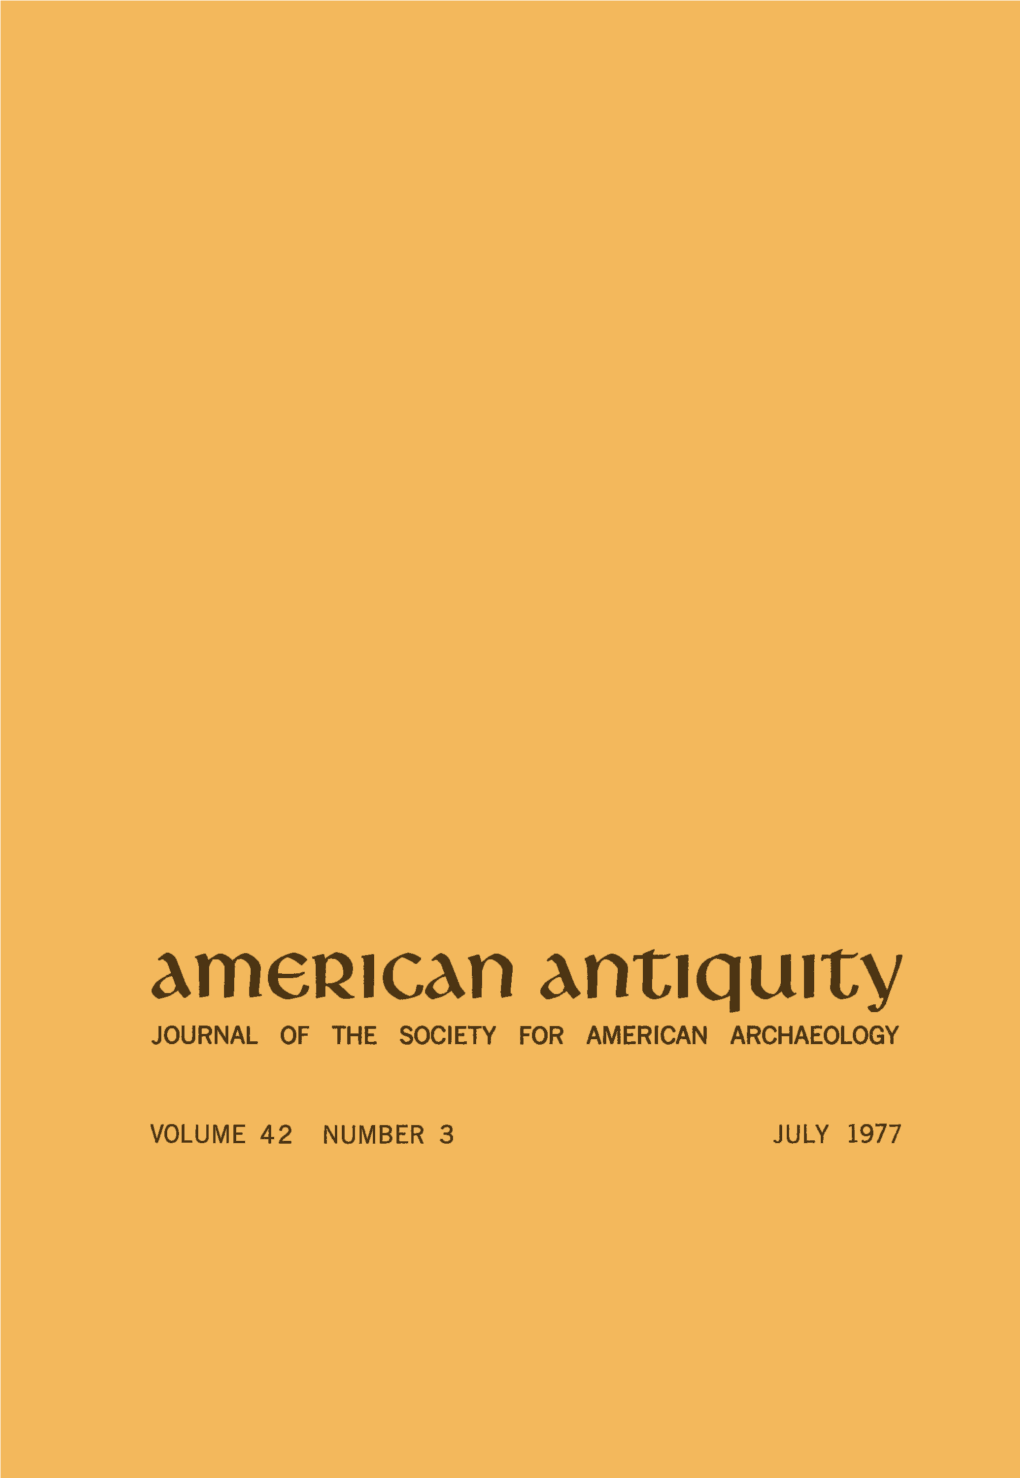 American Antiquity JOURNAL of the SOCIETY for AMERICAN ARCHAEOLOGY